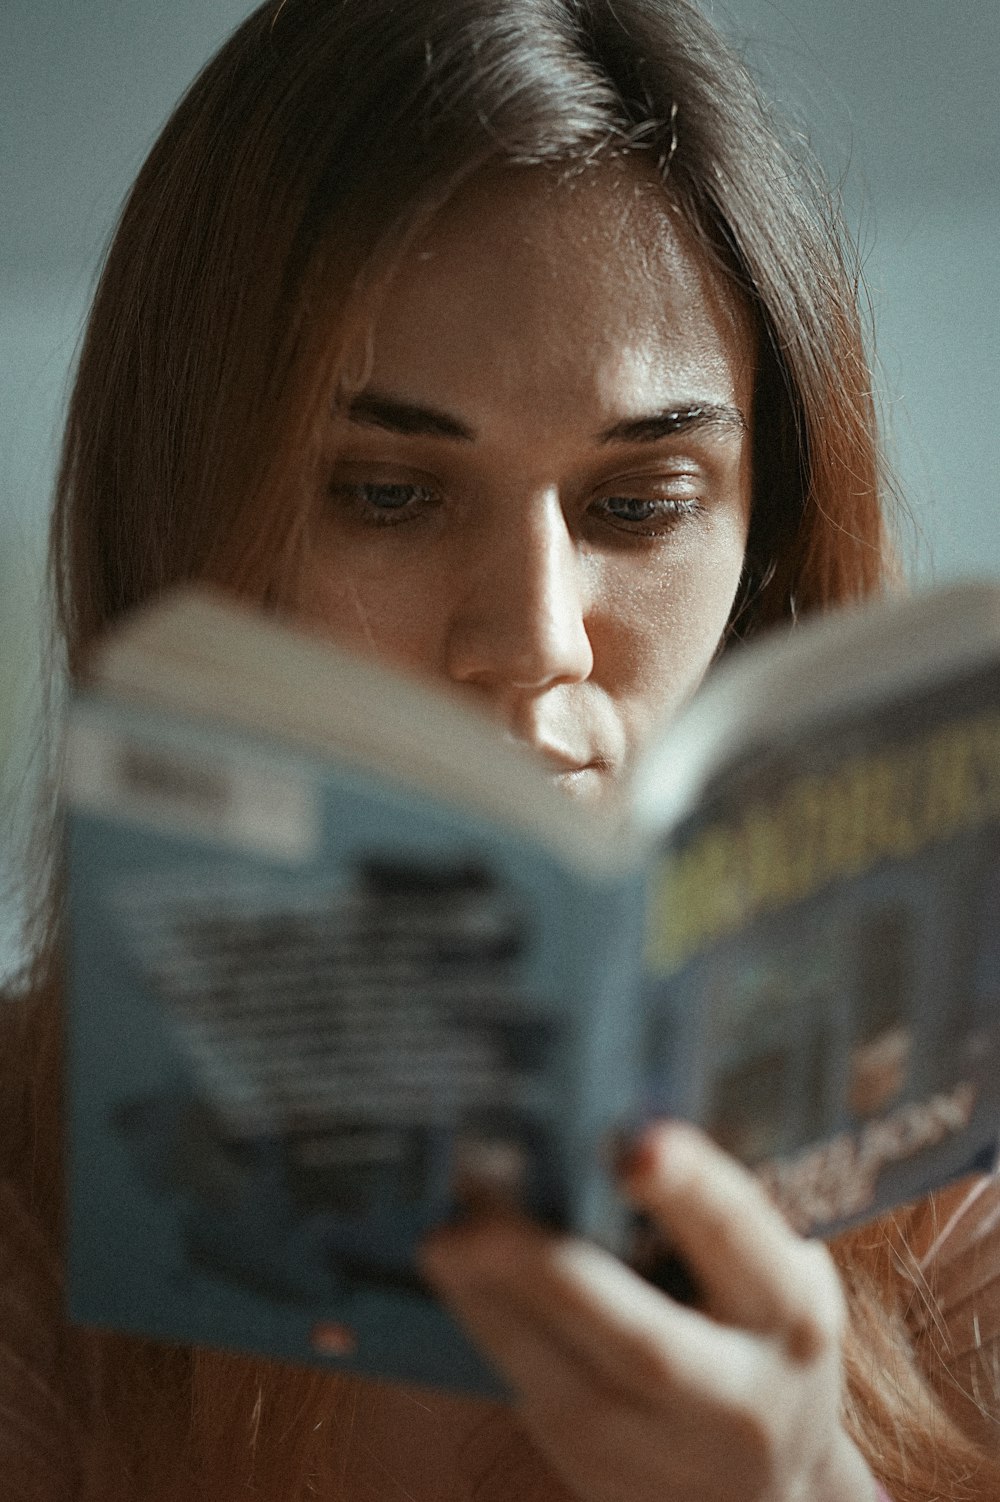 woman holding magazine with womans face